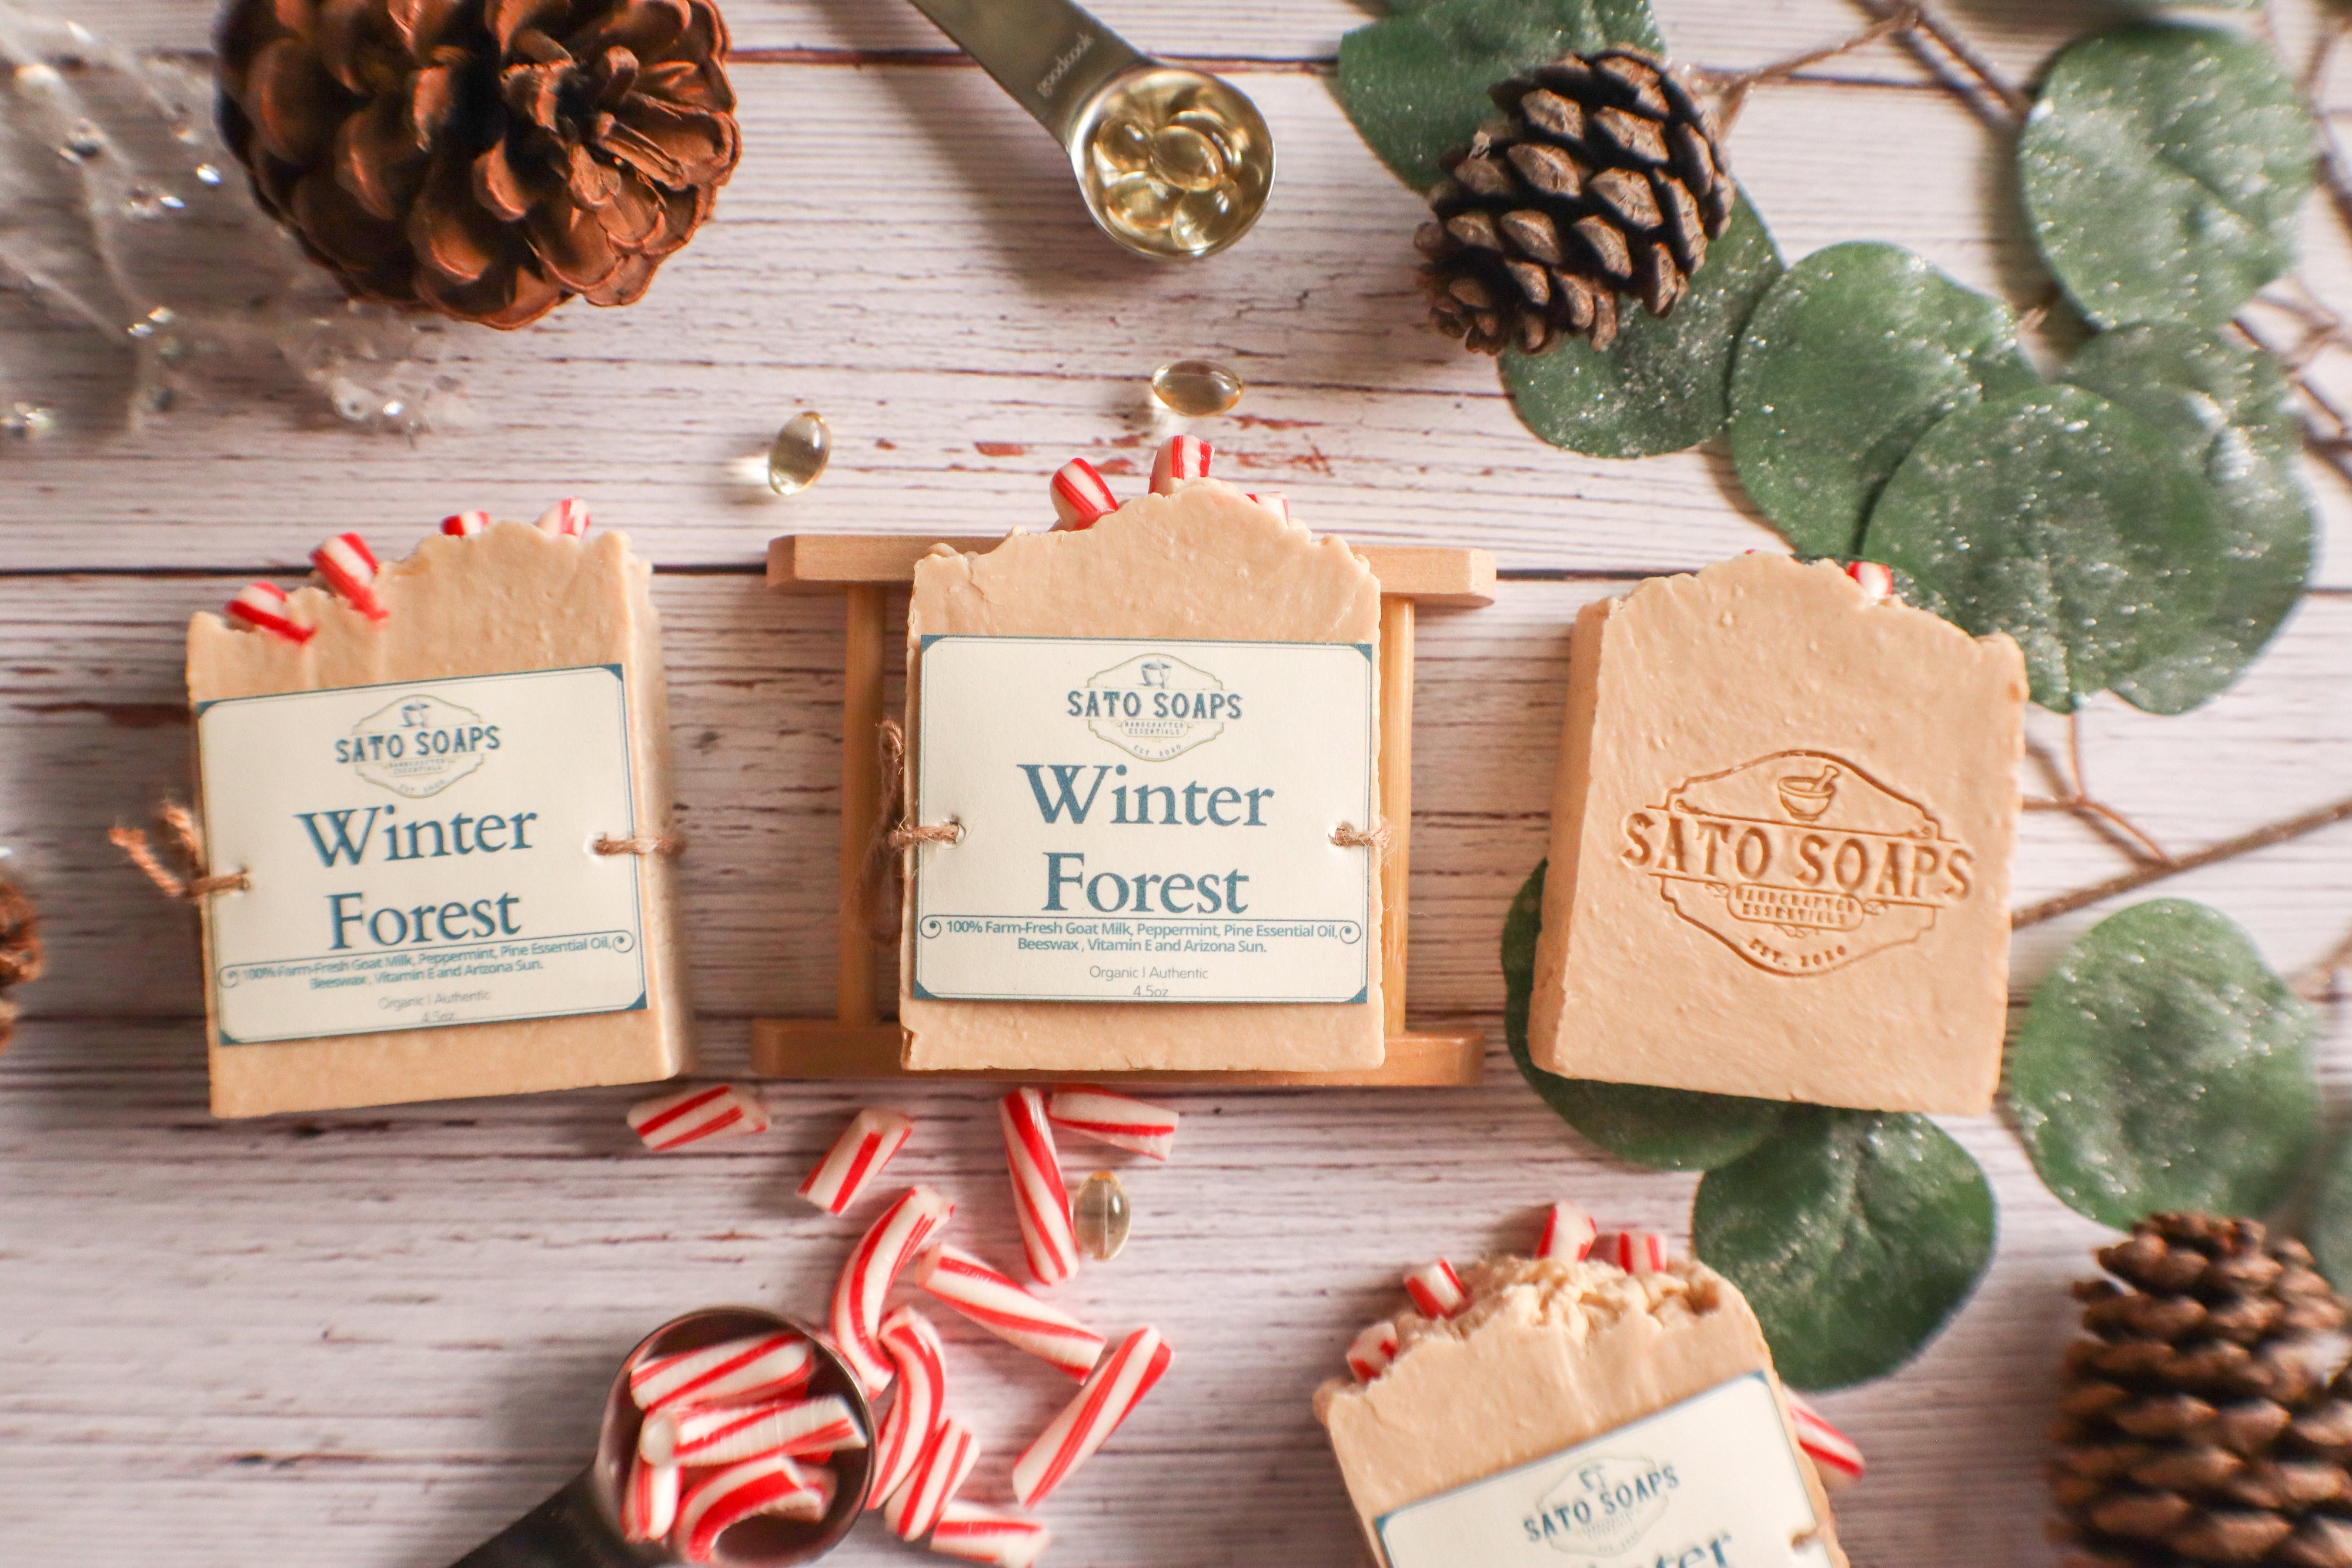 Winter Forest (Nourishing Goats-milk, Peppermint And Pine Soap Bar)